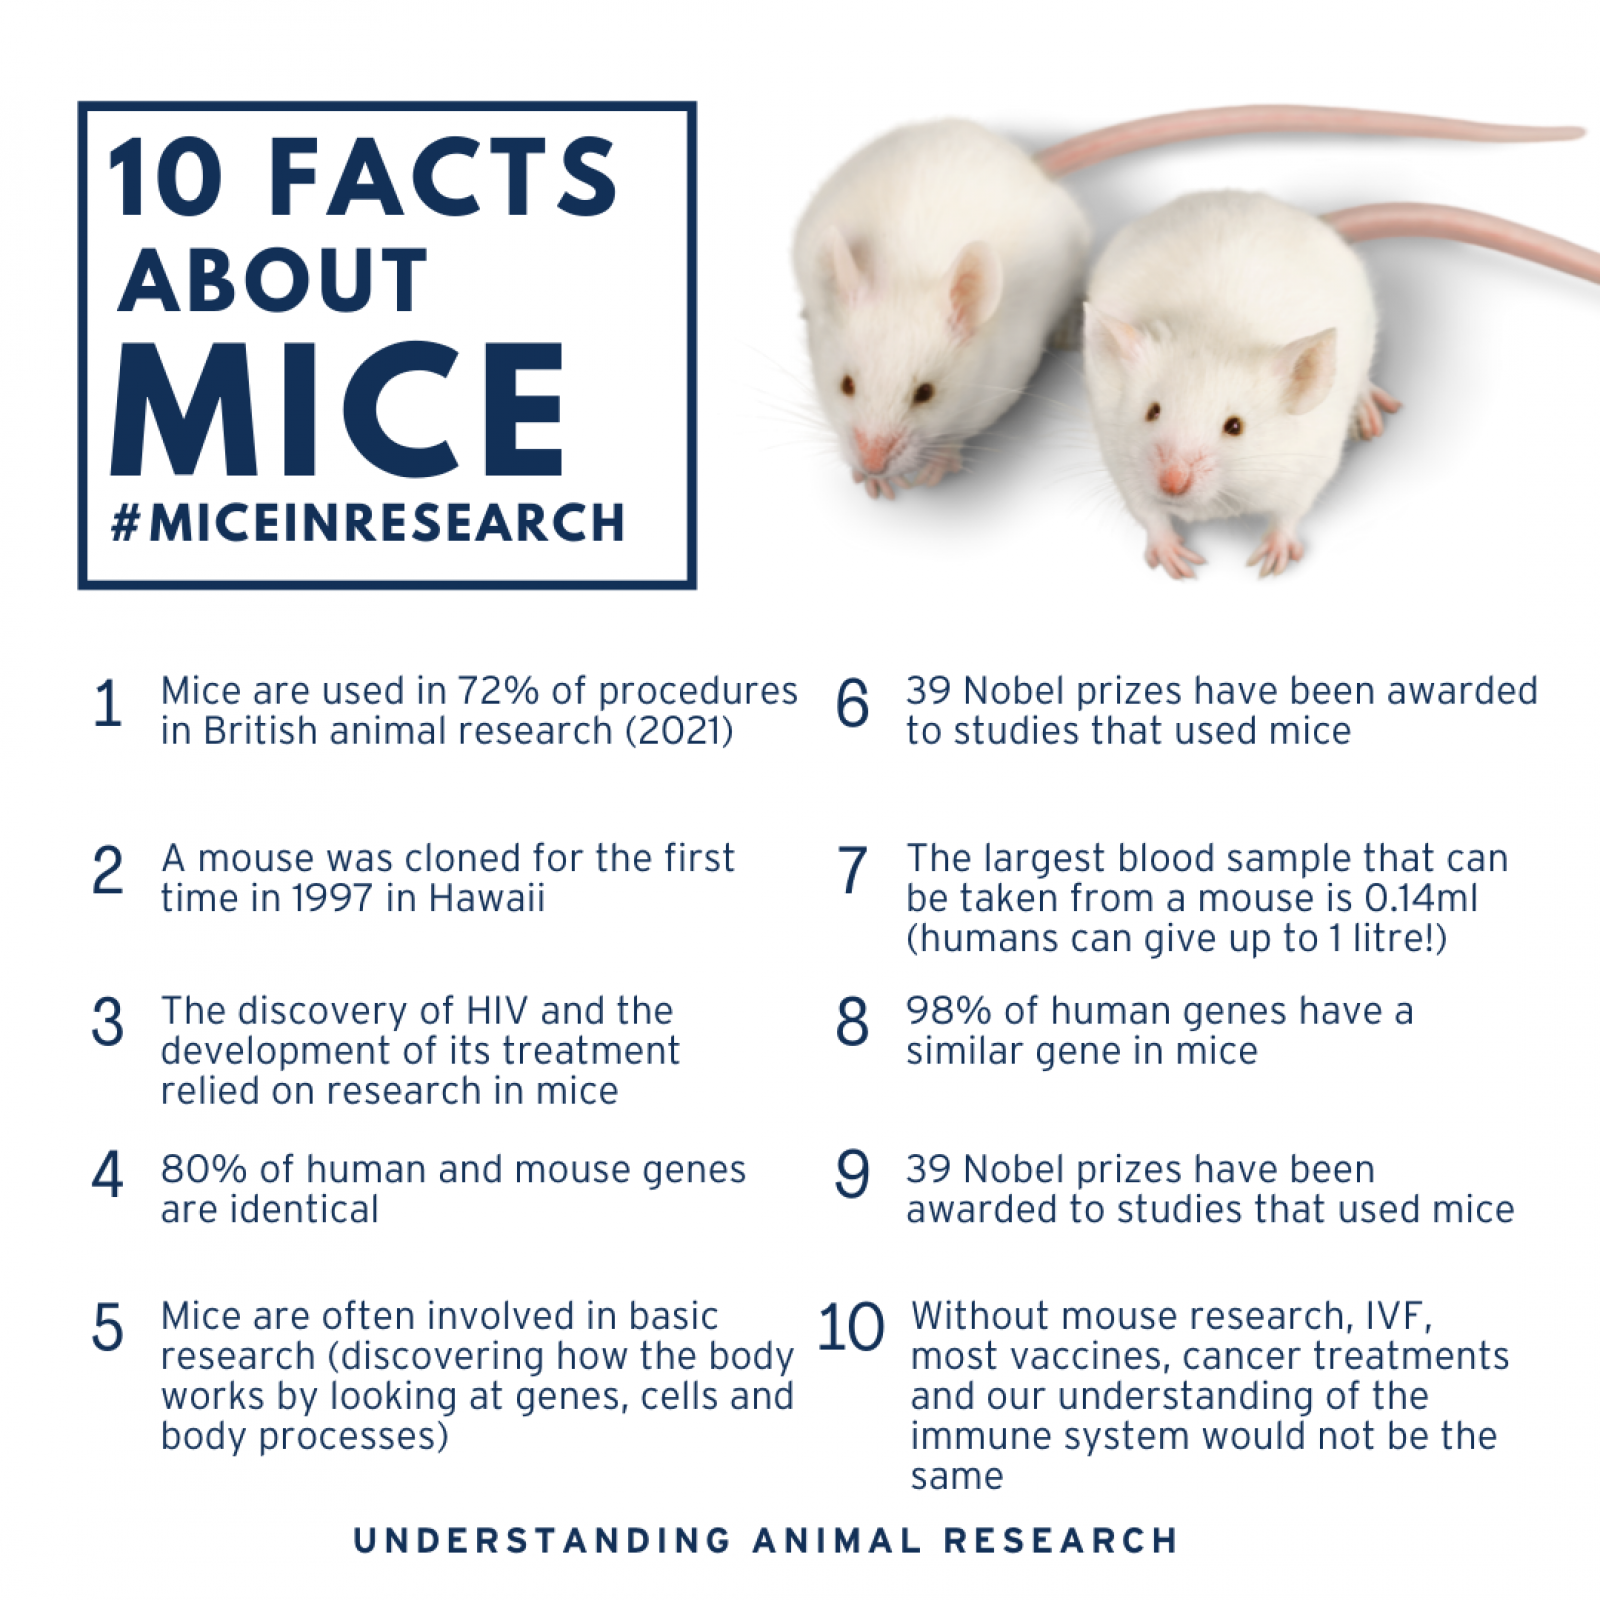 10 facts about mice #MiceInResearch 2022